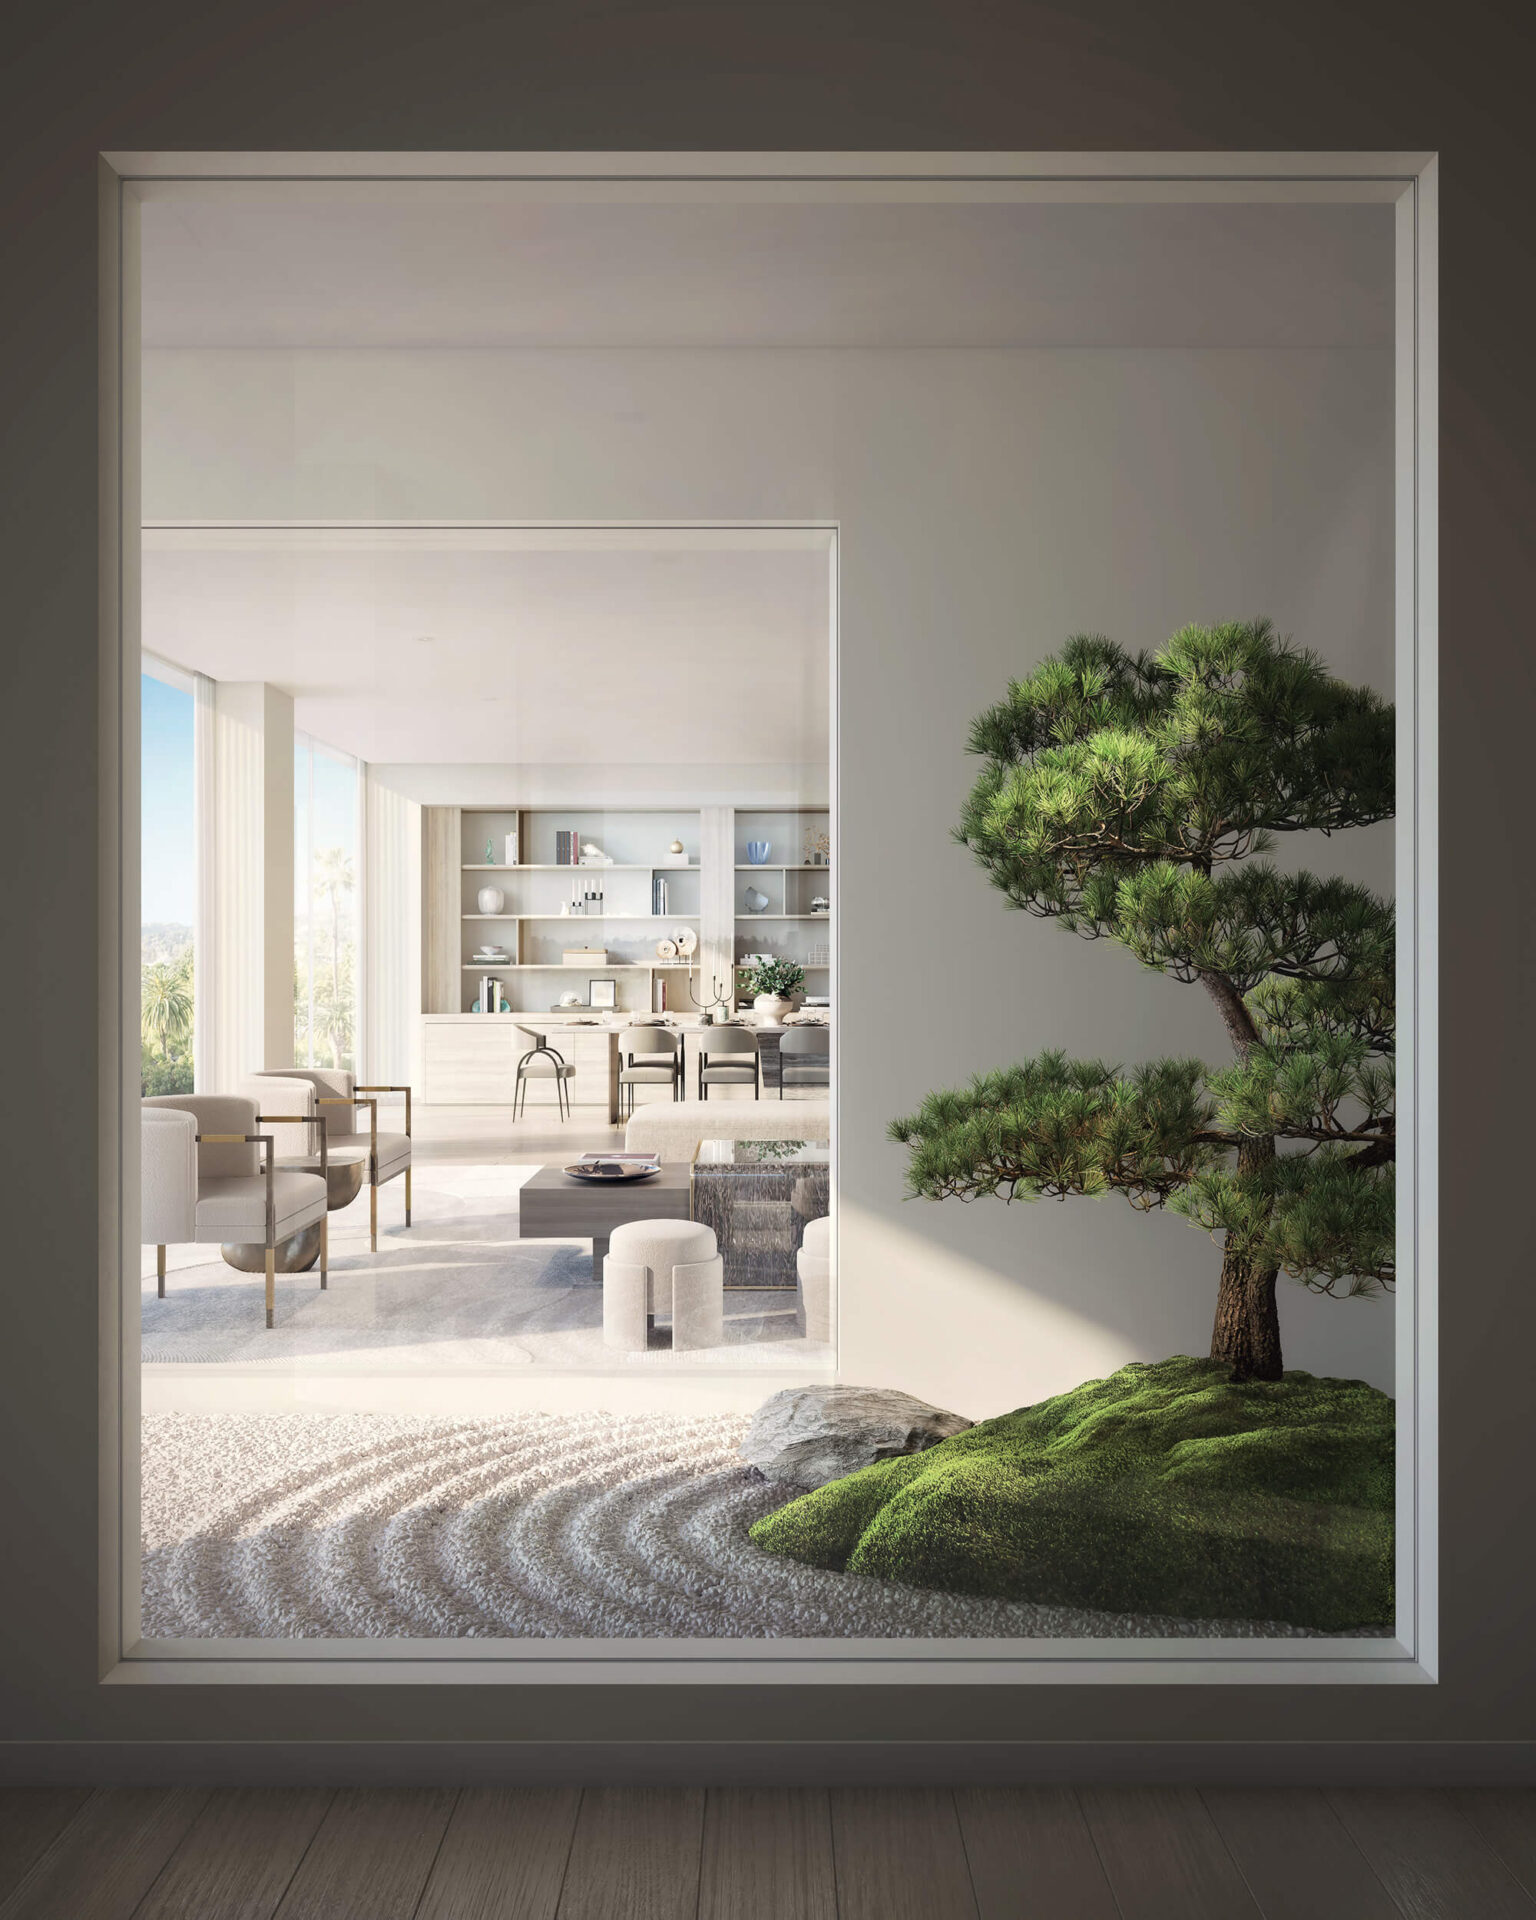 mandarin oriental beverly hills rendering of a japanese rock garden with a living room in the background